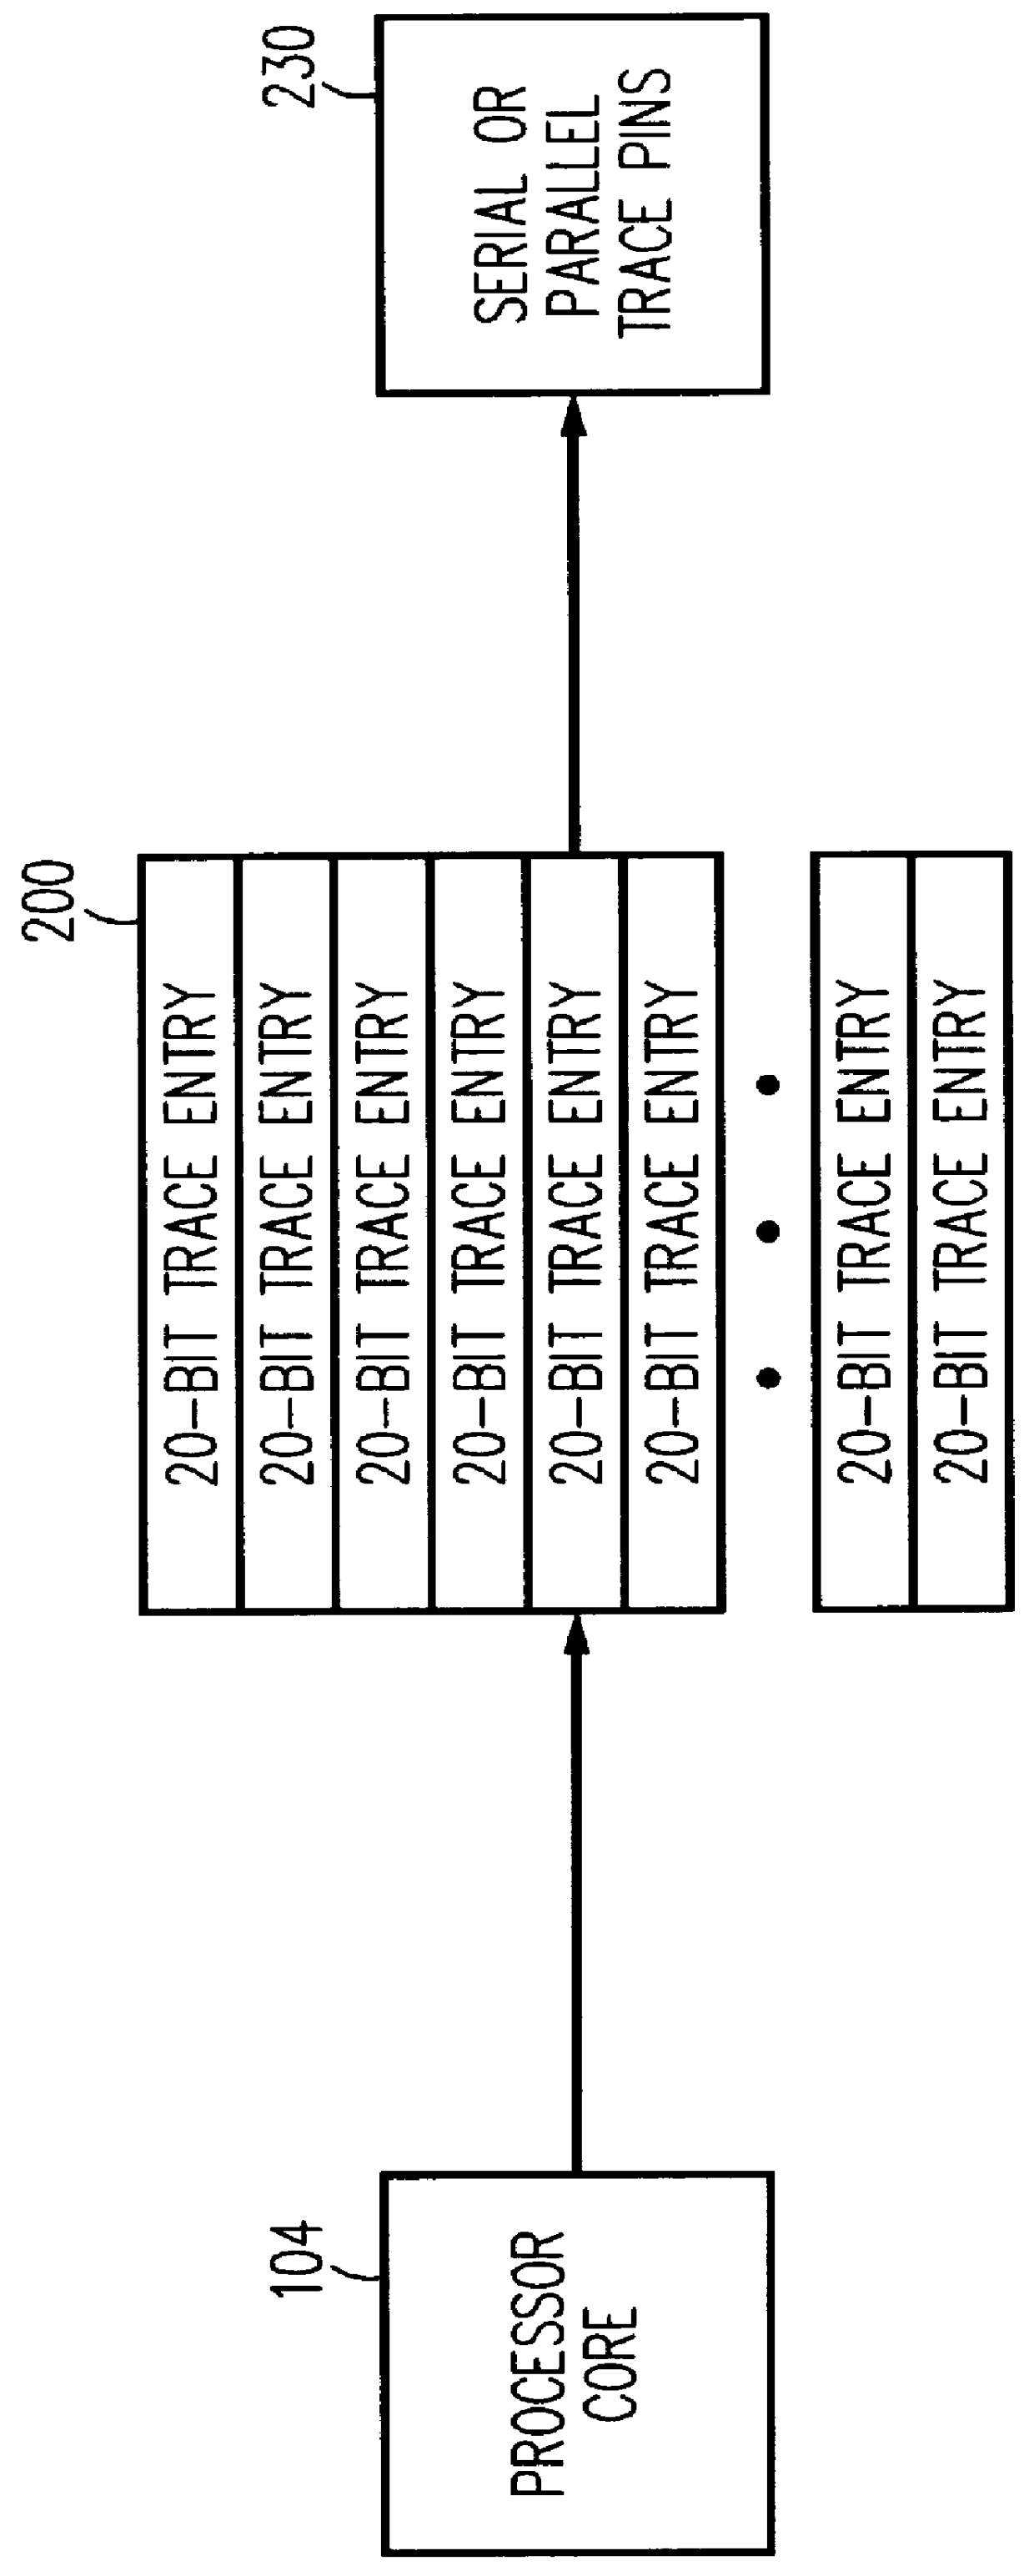 Parallel and serial debug port on a processor